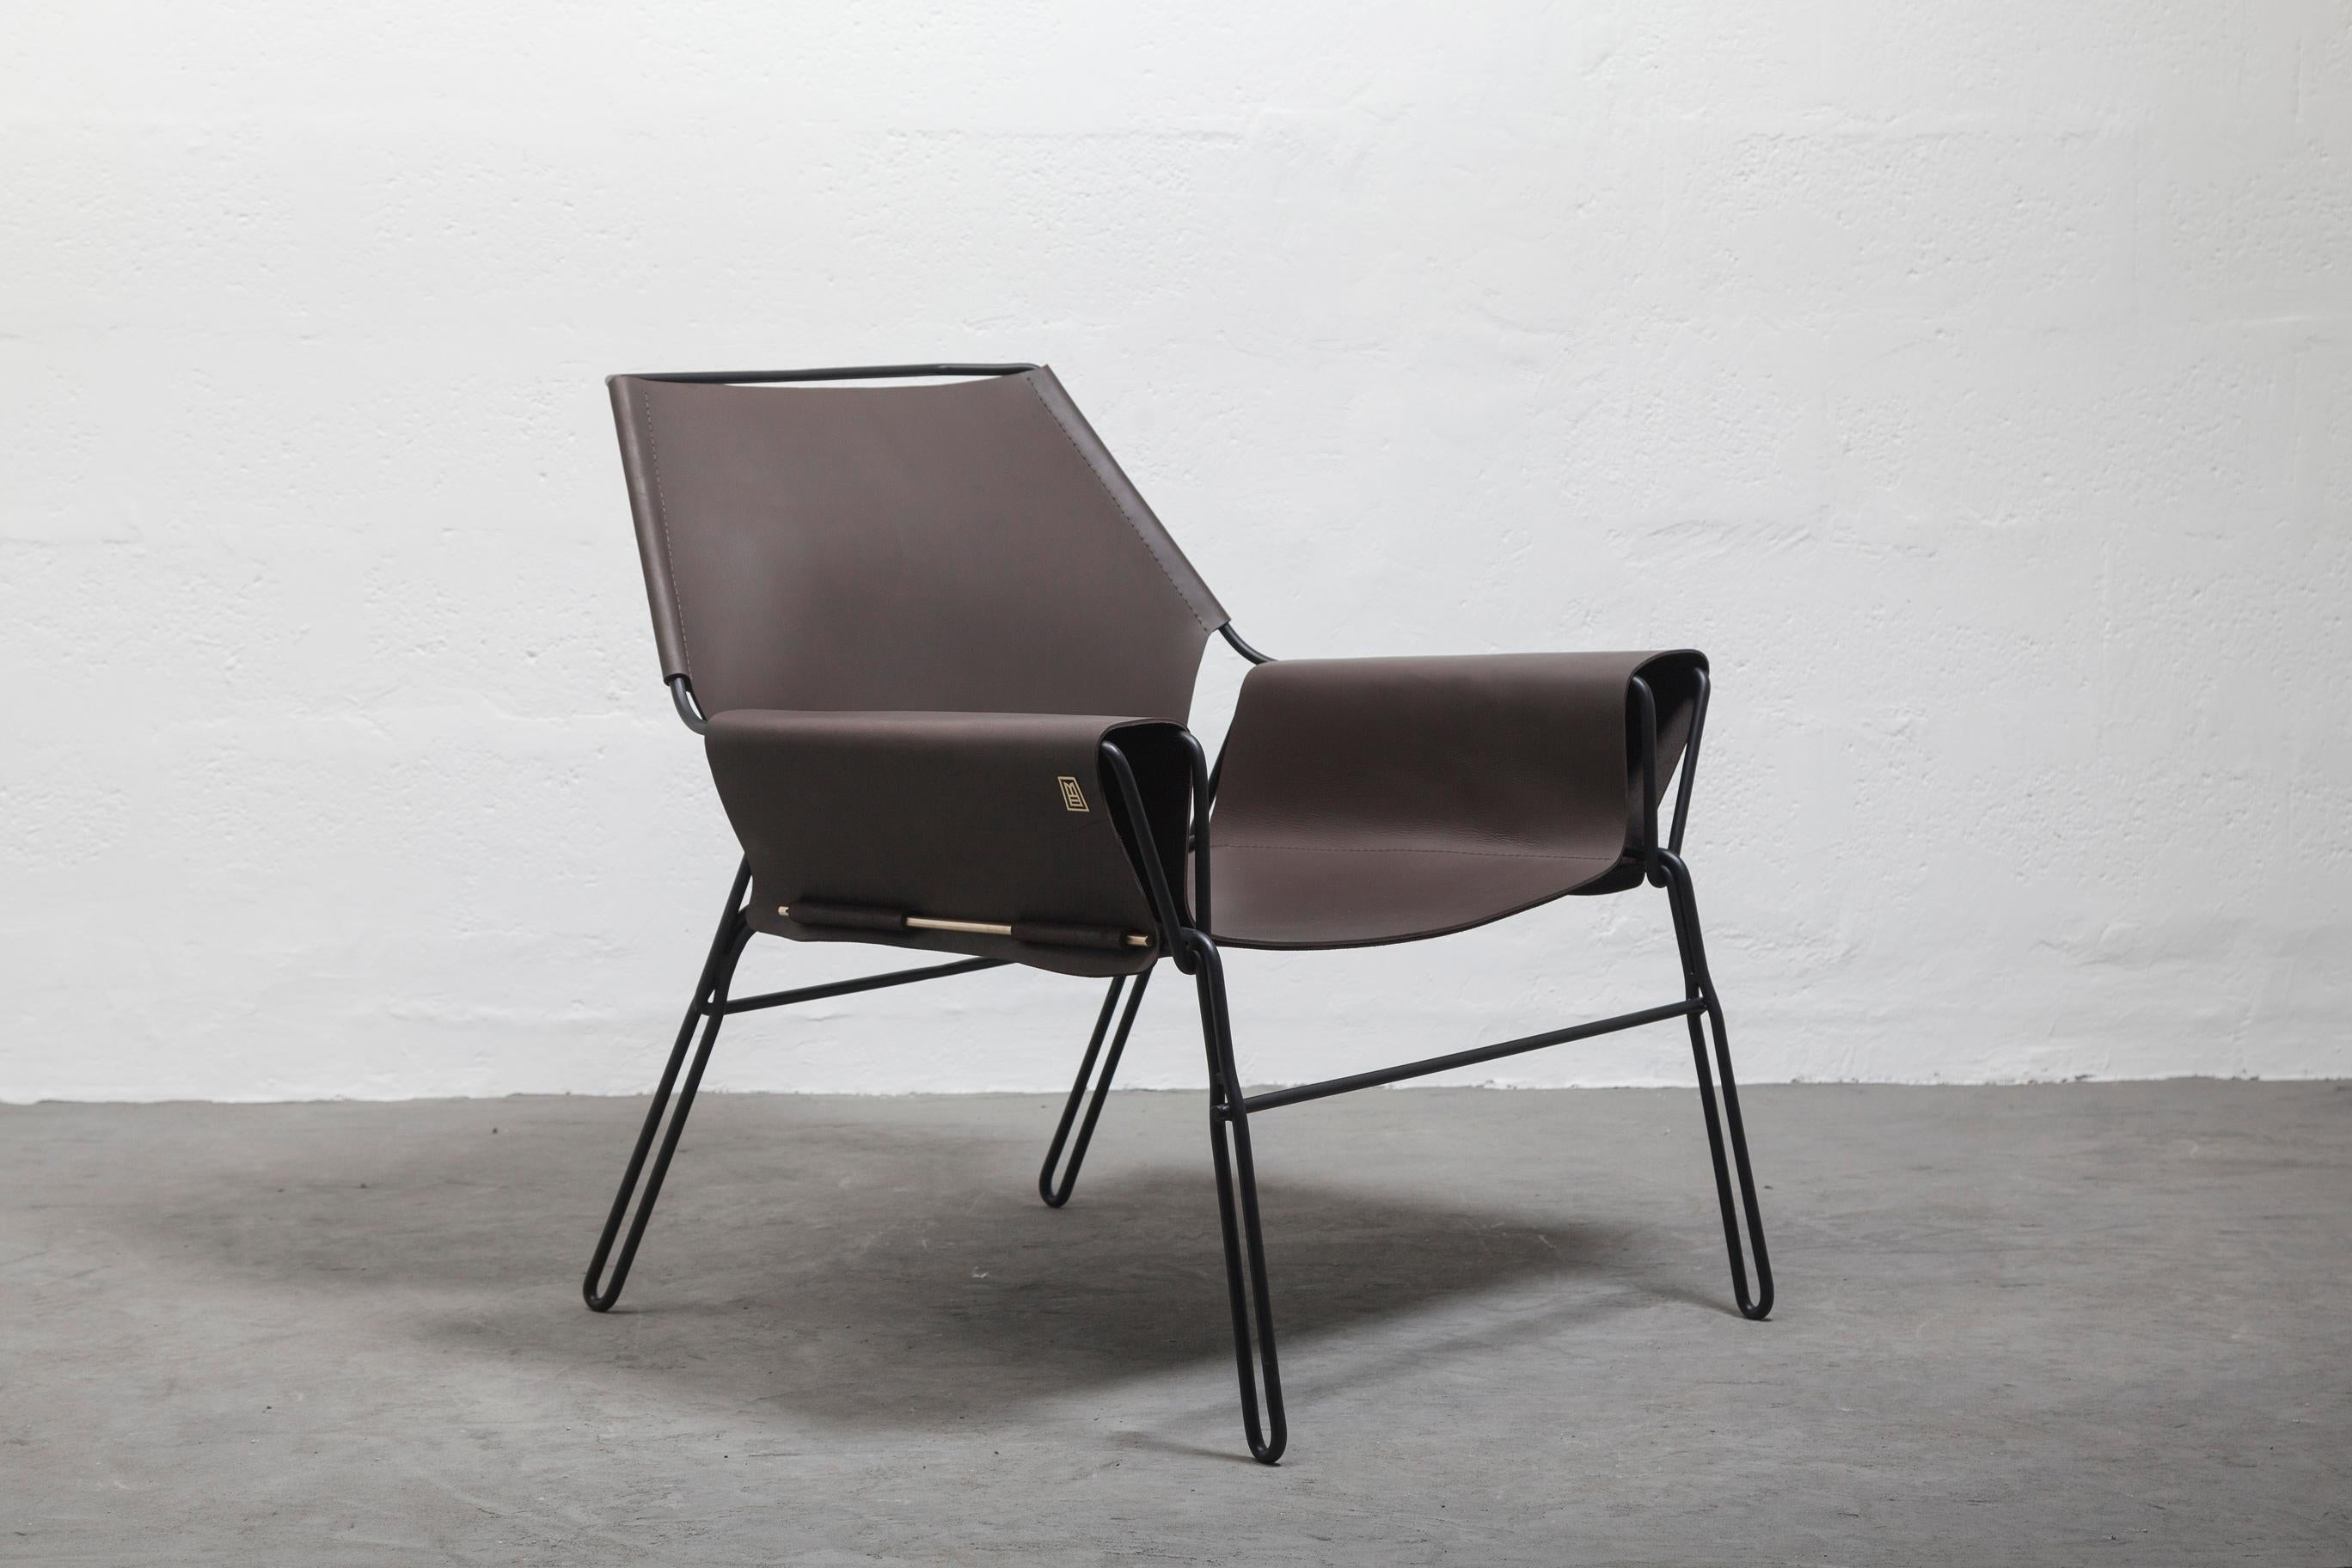 Lounge chair made of black finish steel rod structure, Ecuadorian cowhide leather seat, and lathed bronze or stainless steel hardware. Available in Olivo, Brown, and Cognac thick leather options.

The first Perfidia collection, composed of 4 pieces